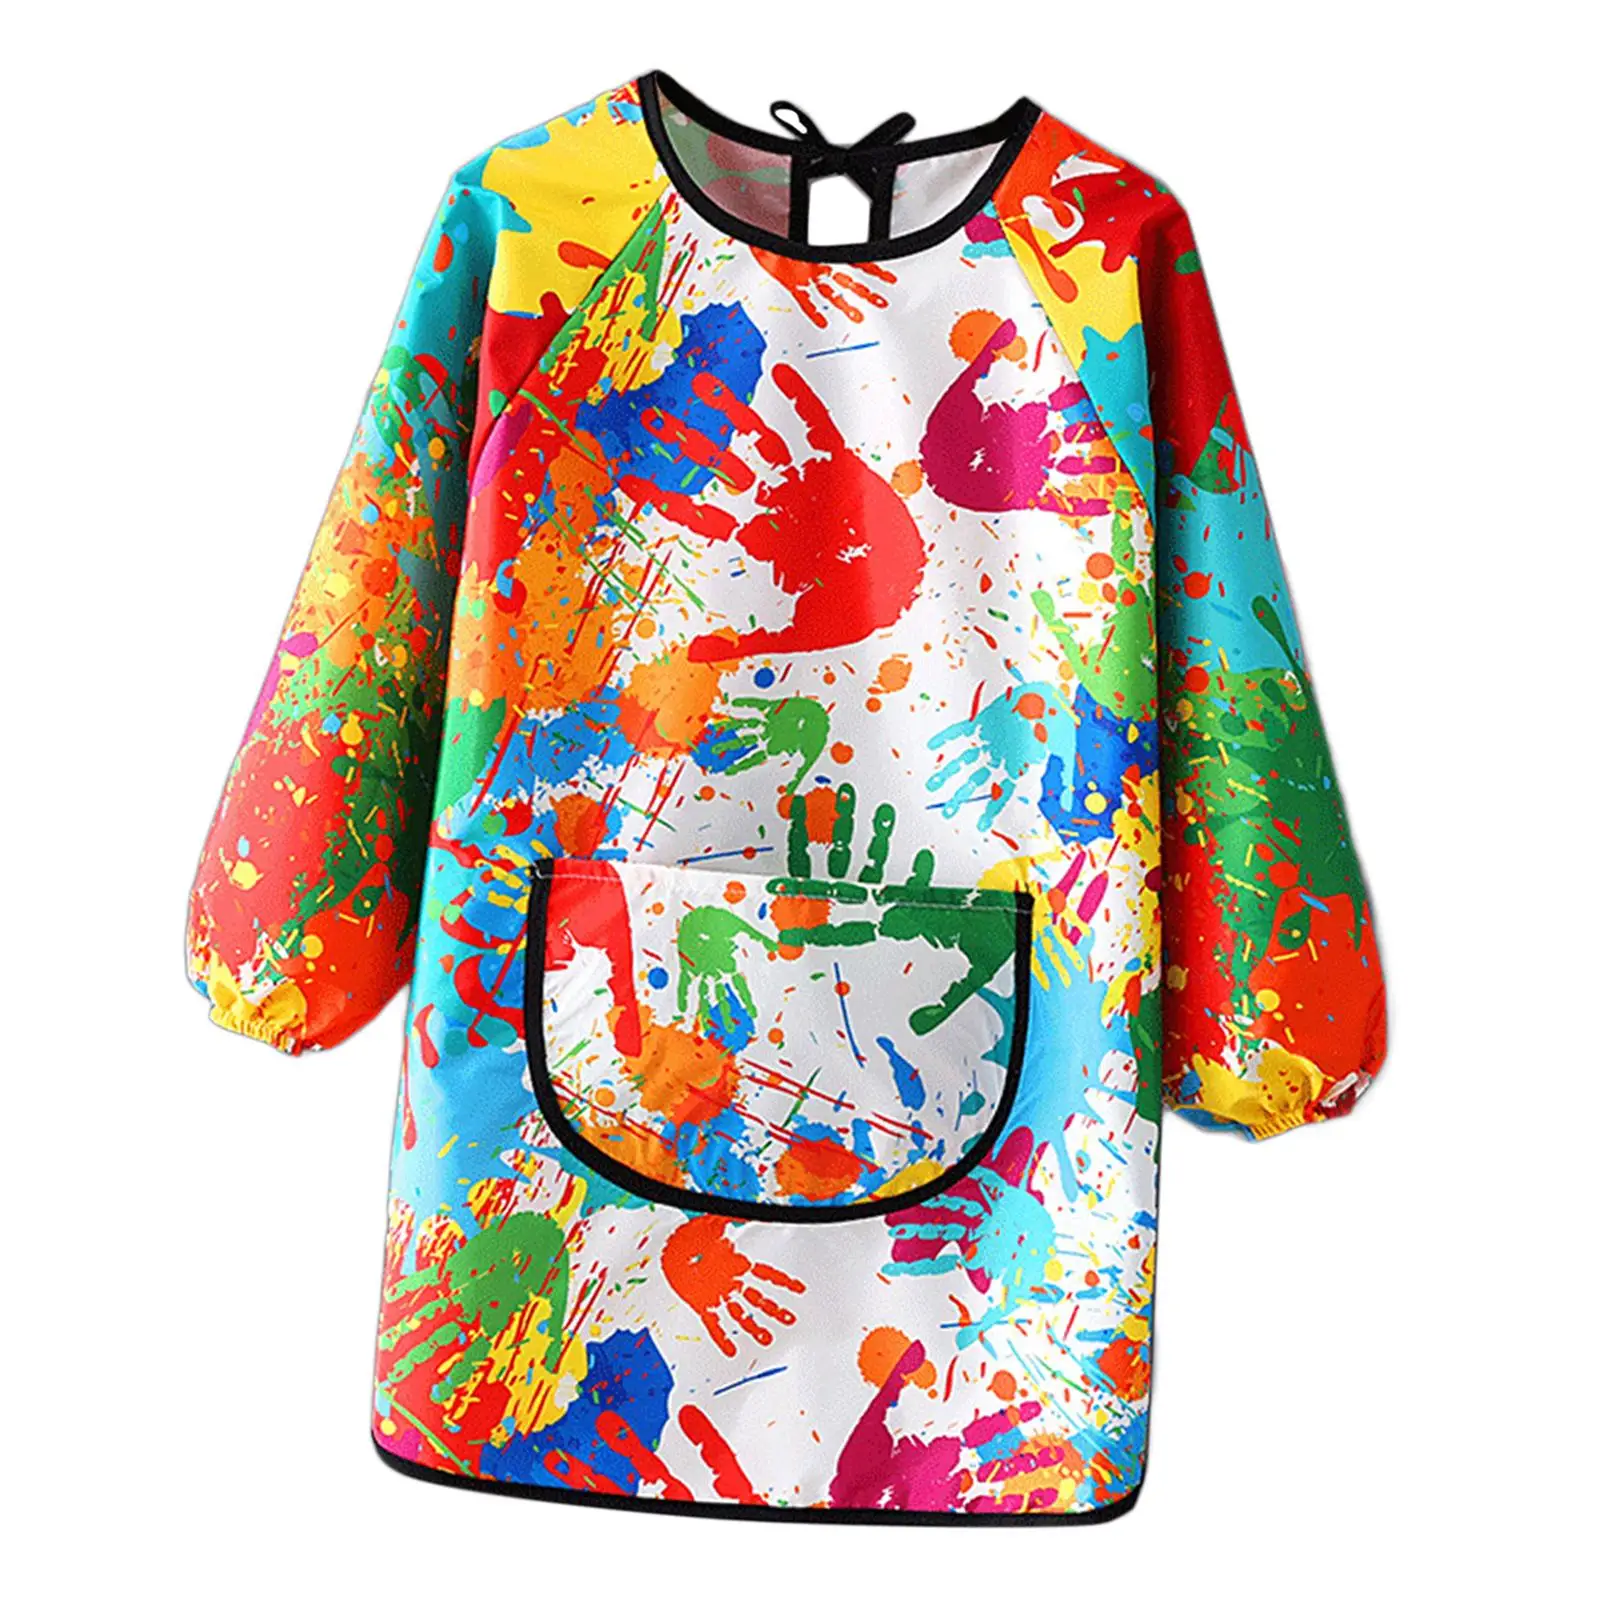 Kids Art Smock Easy to Clean Artist Painting Apron for Baking Cooking Baby